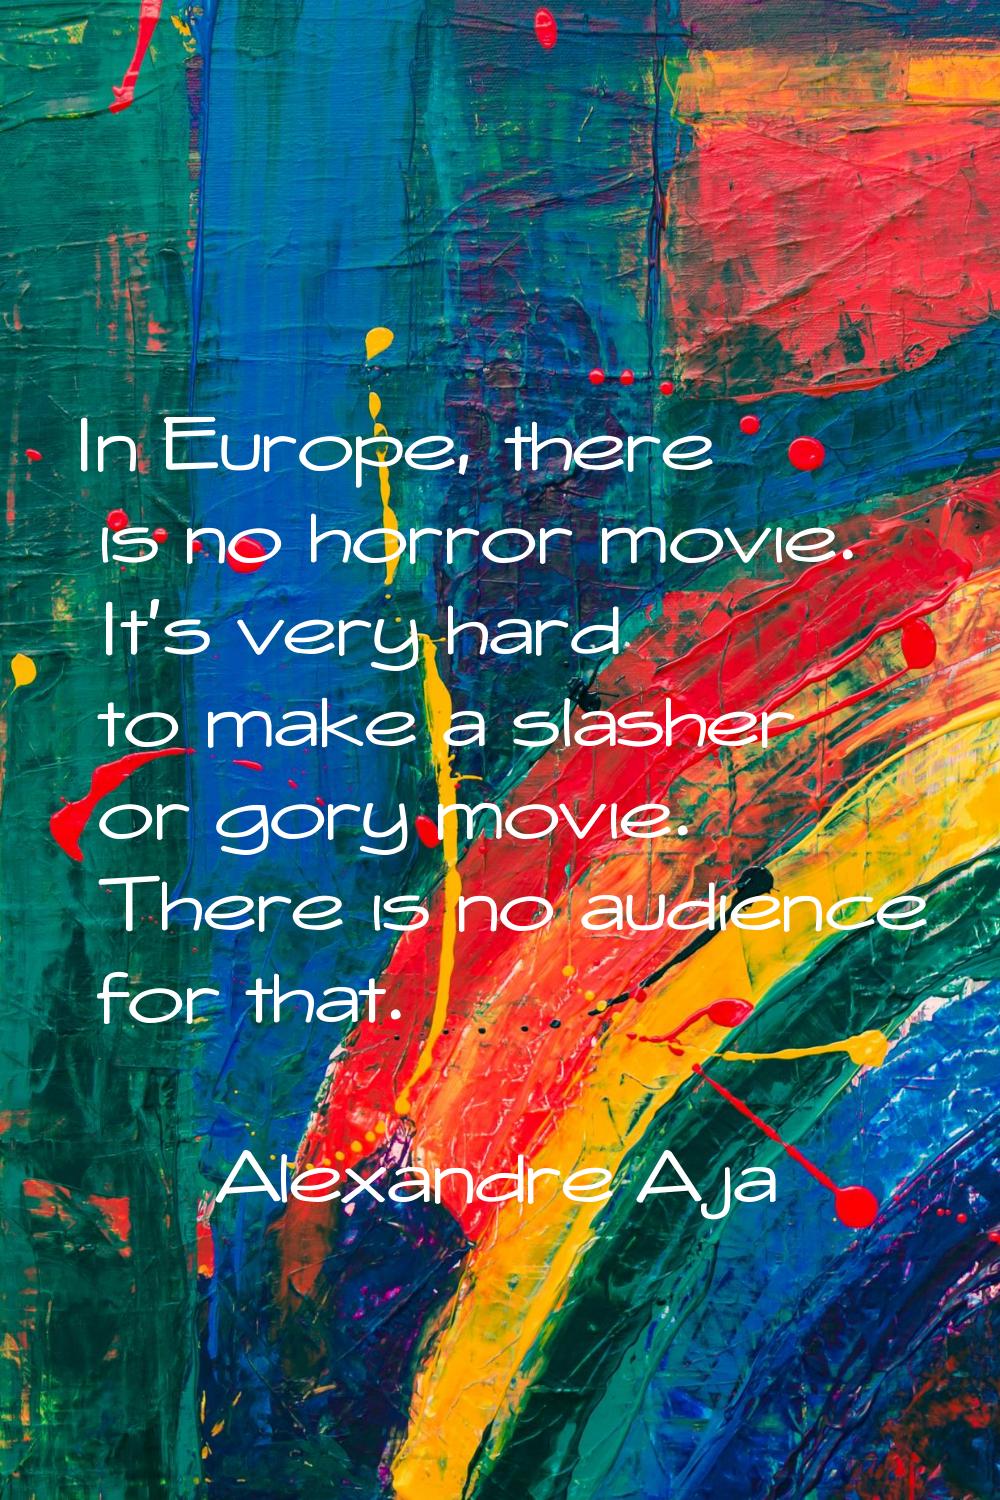 In Europe, there is no horror movie. It's very hard to make a slasher or gory movie. There is no au